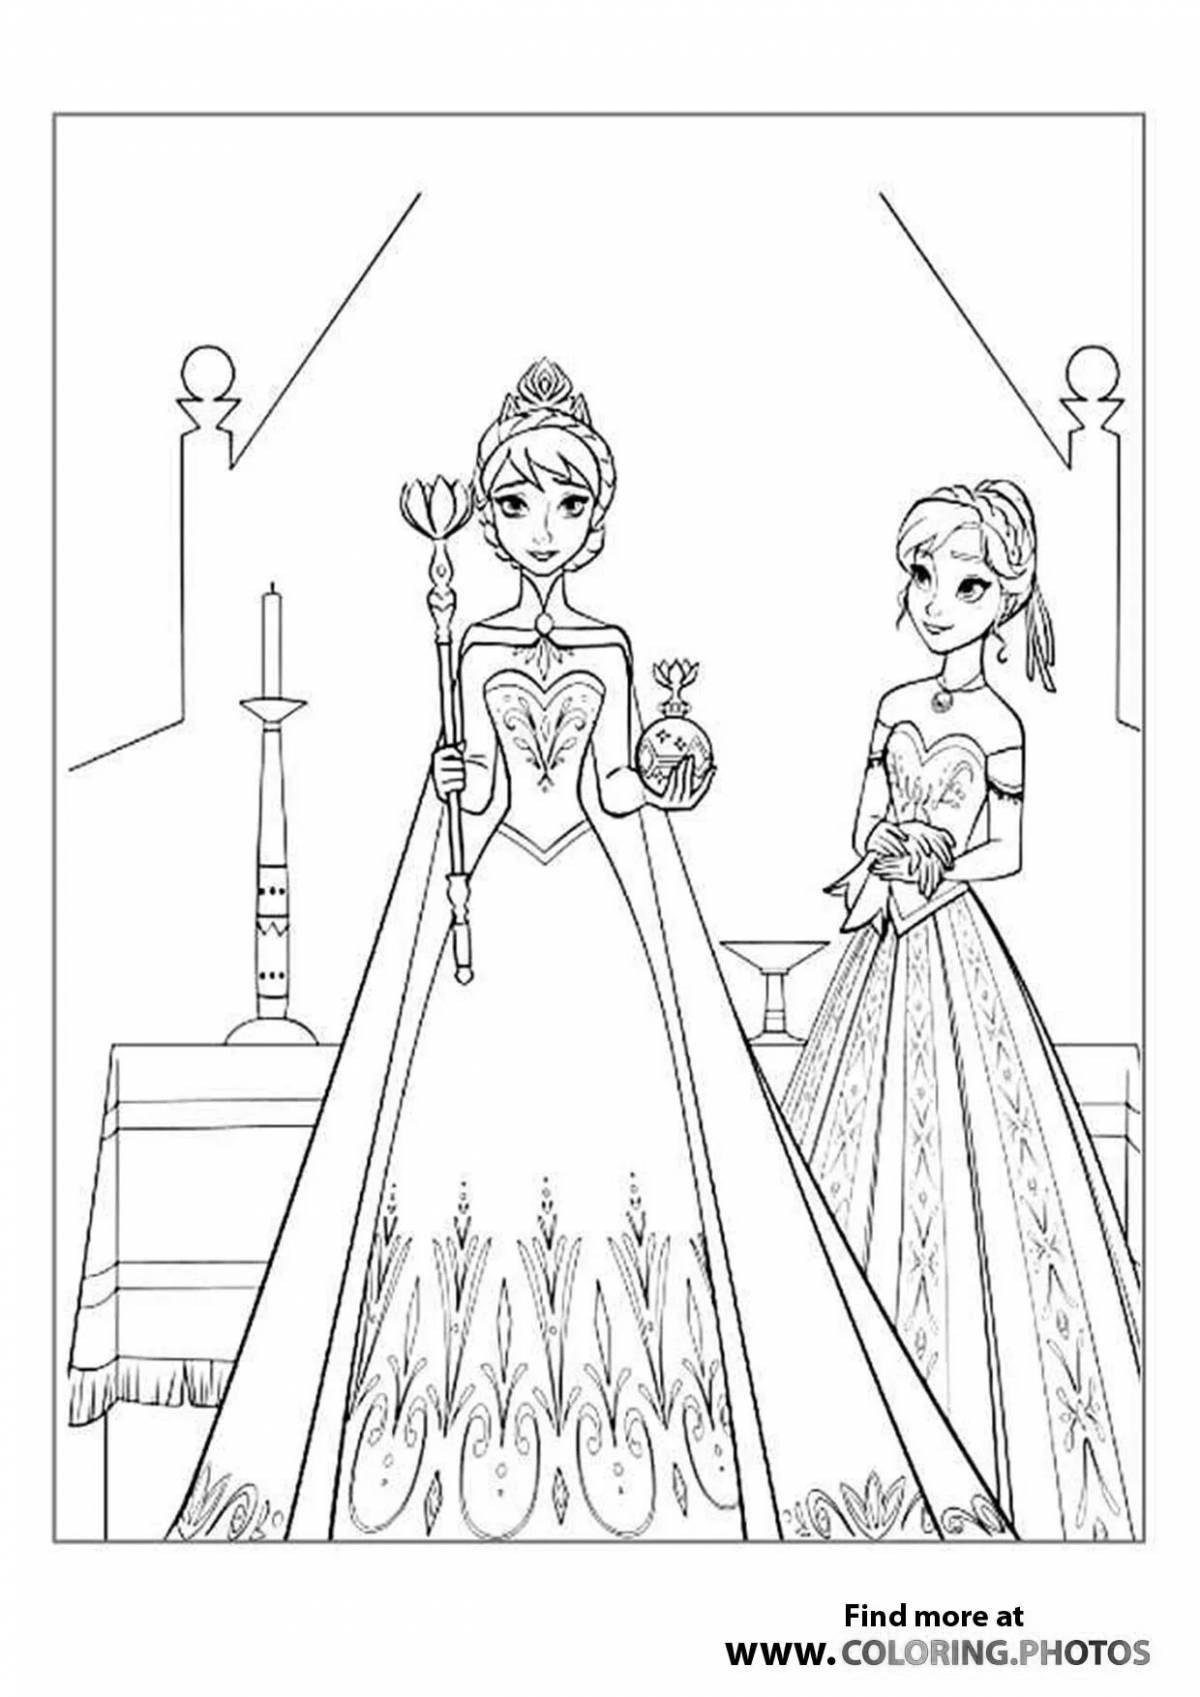 Coloring book decorated castle of the cold heart